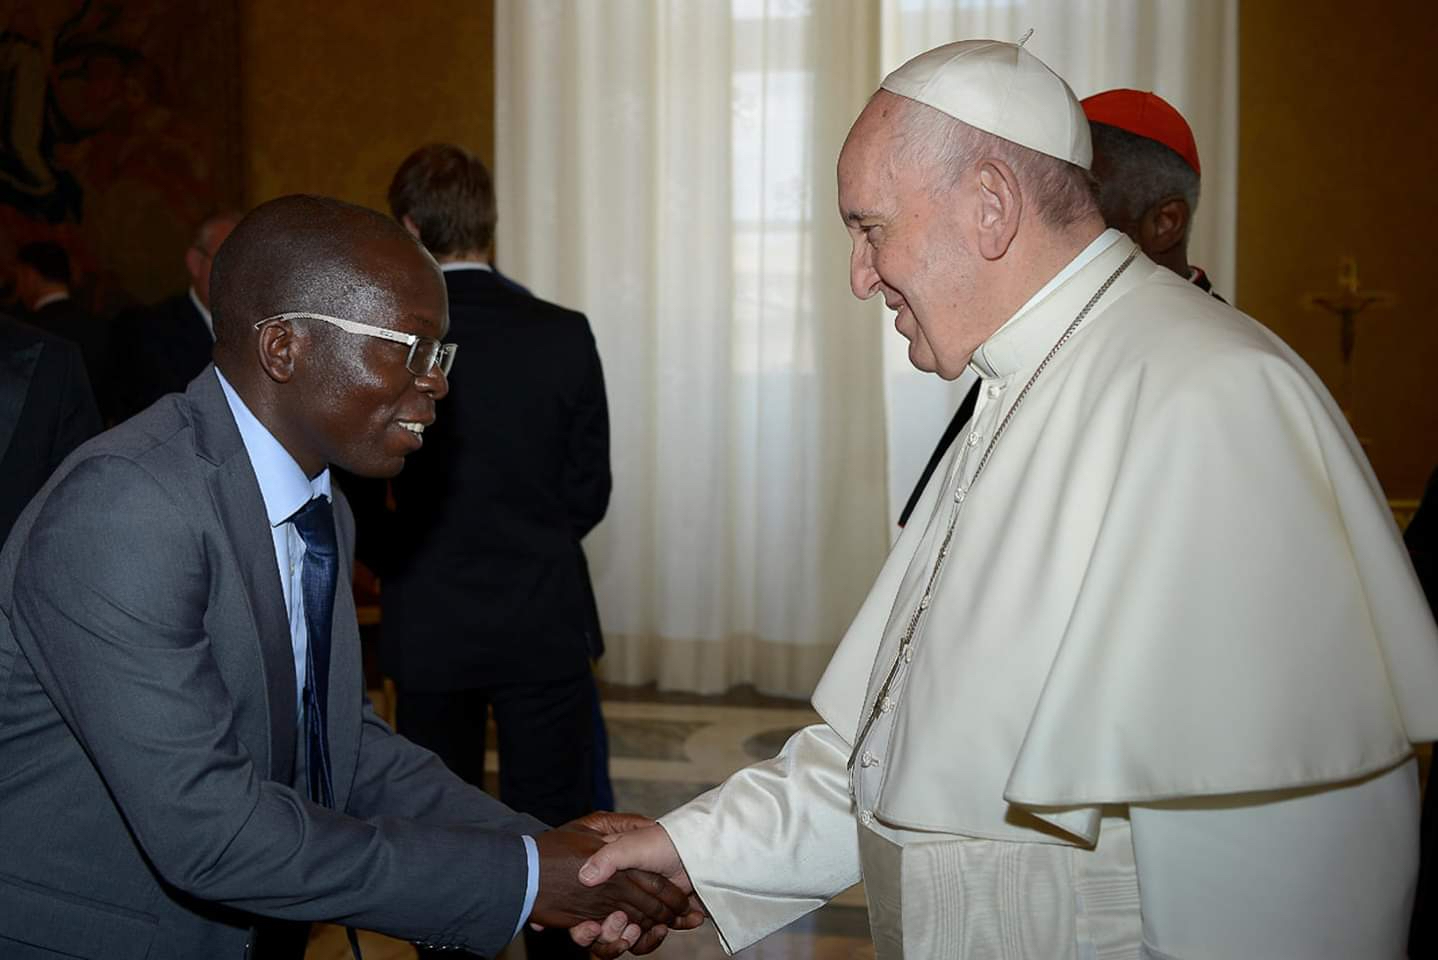 Mozambicans hope papal visit will sow seeds of peace, says Lay Centre scholar